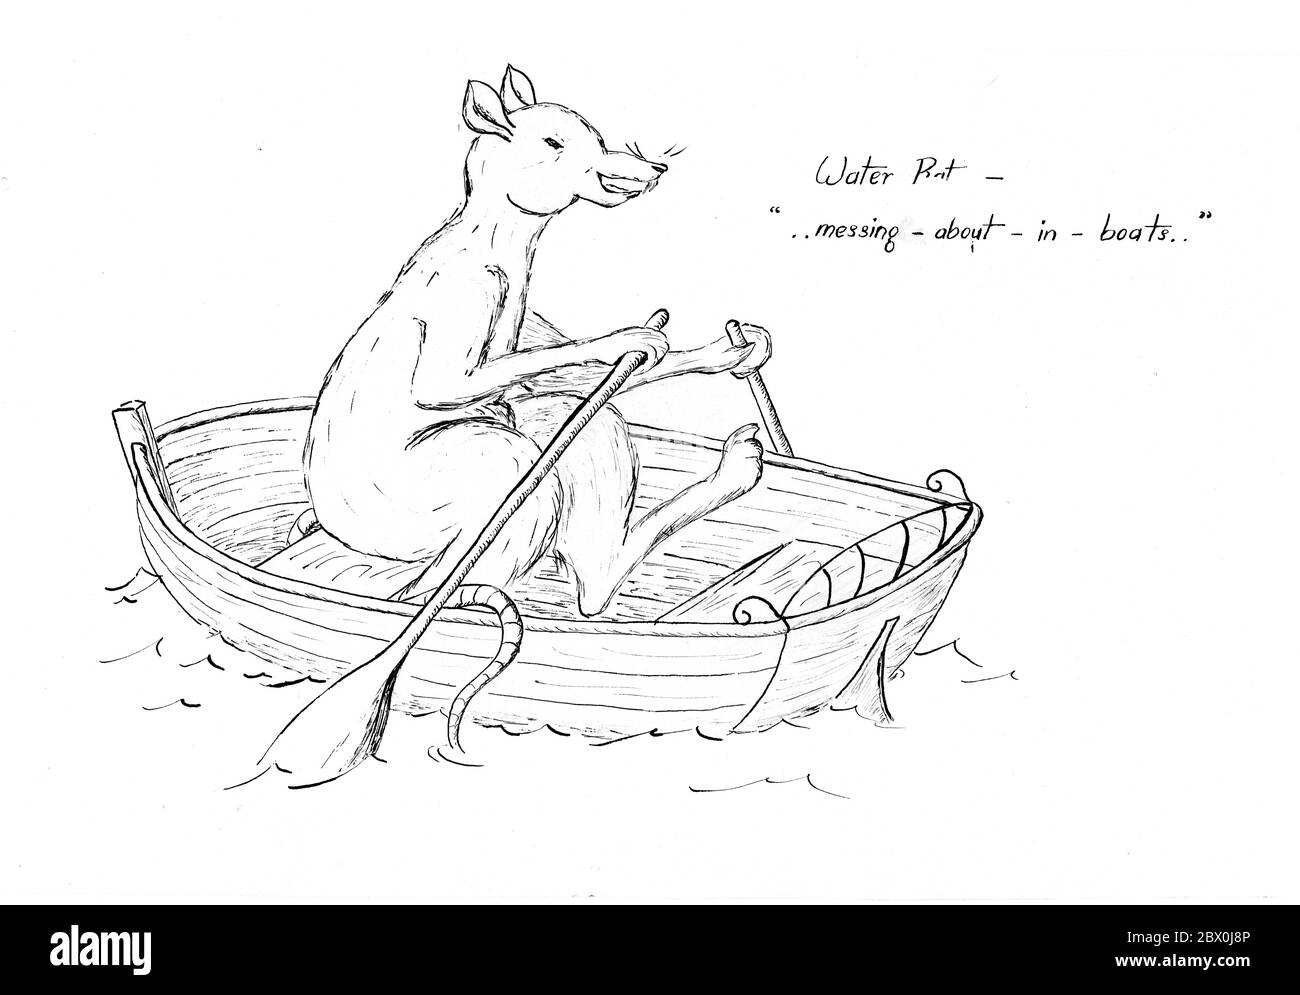 '“Believe me, my young friend, there is nothing - absolutely nothing - half so much worth doing as simply messing about in boats.”' - Original unpublished pen drawing/sketch by authoress Elizabeth Ince (1927-1972) to illustrate Kenneth Grahame's Wind in the Willows Stock Photo